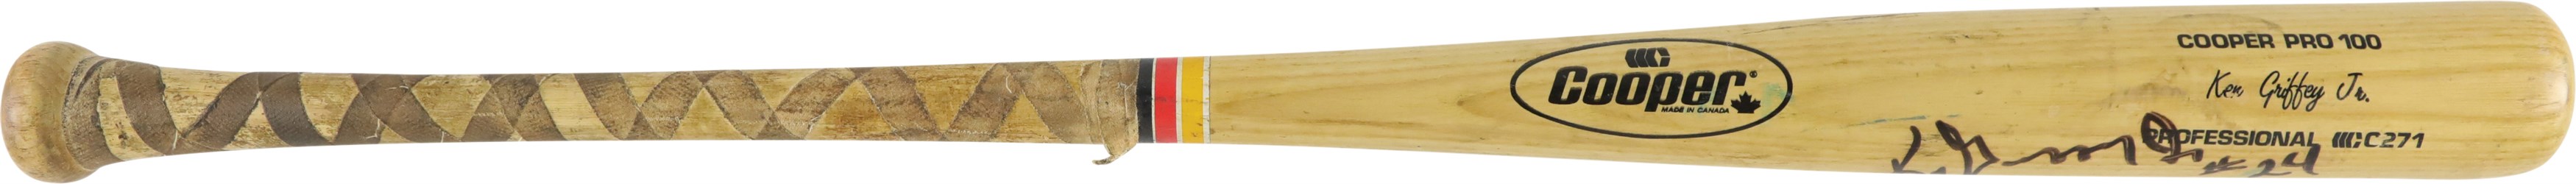 Baseball Equipment - 1989 Ken Griffey Jr. Rookie Seattle Mariners Signed Game Used Bat with Rookie Signature (PSA GU 9.5)